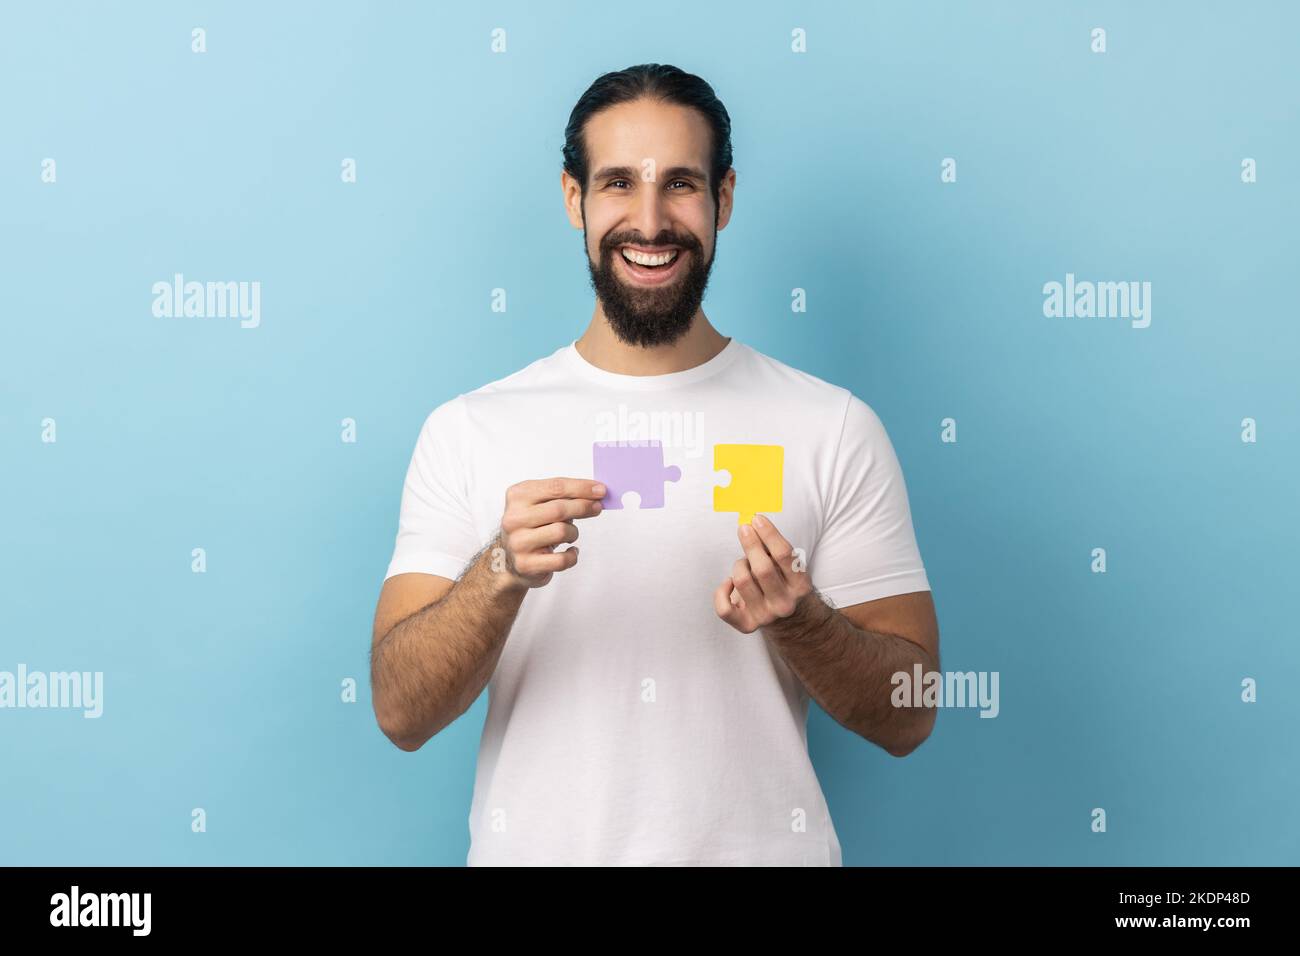 Portrait of man with beard wearing white T-shirt holding yellow and purple puzzle pieces, solving tasks, looking at camera with toothy smile. Indoor studio shot isolated on blue background. Stock Photo